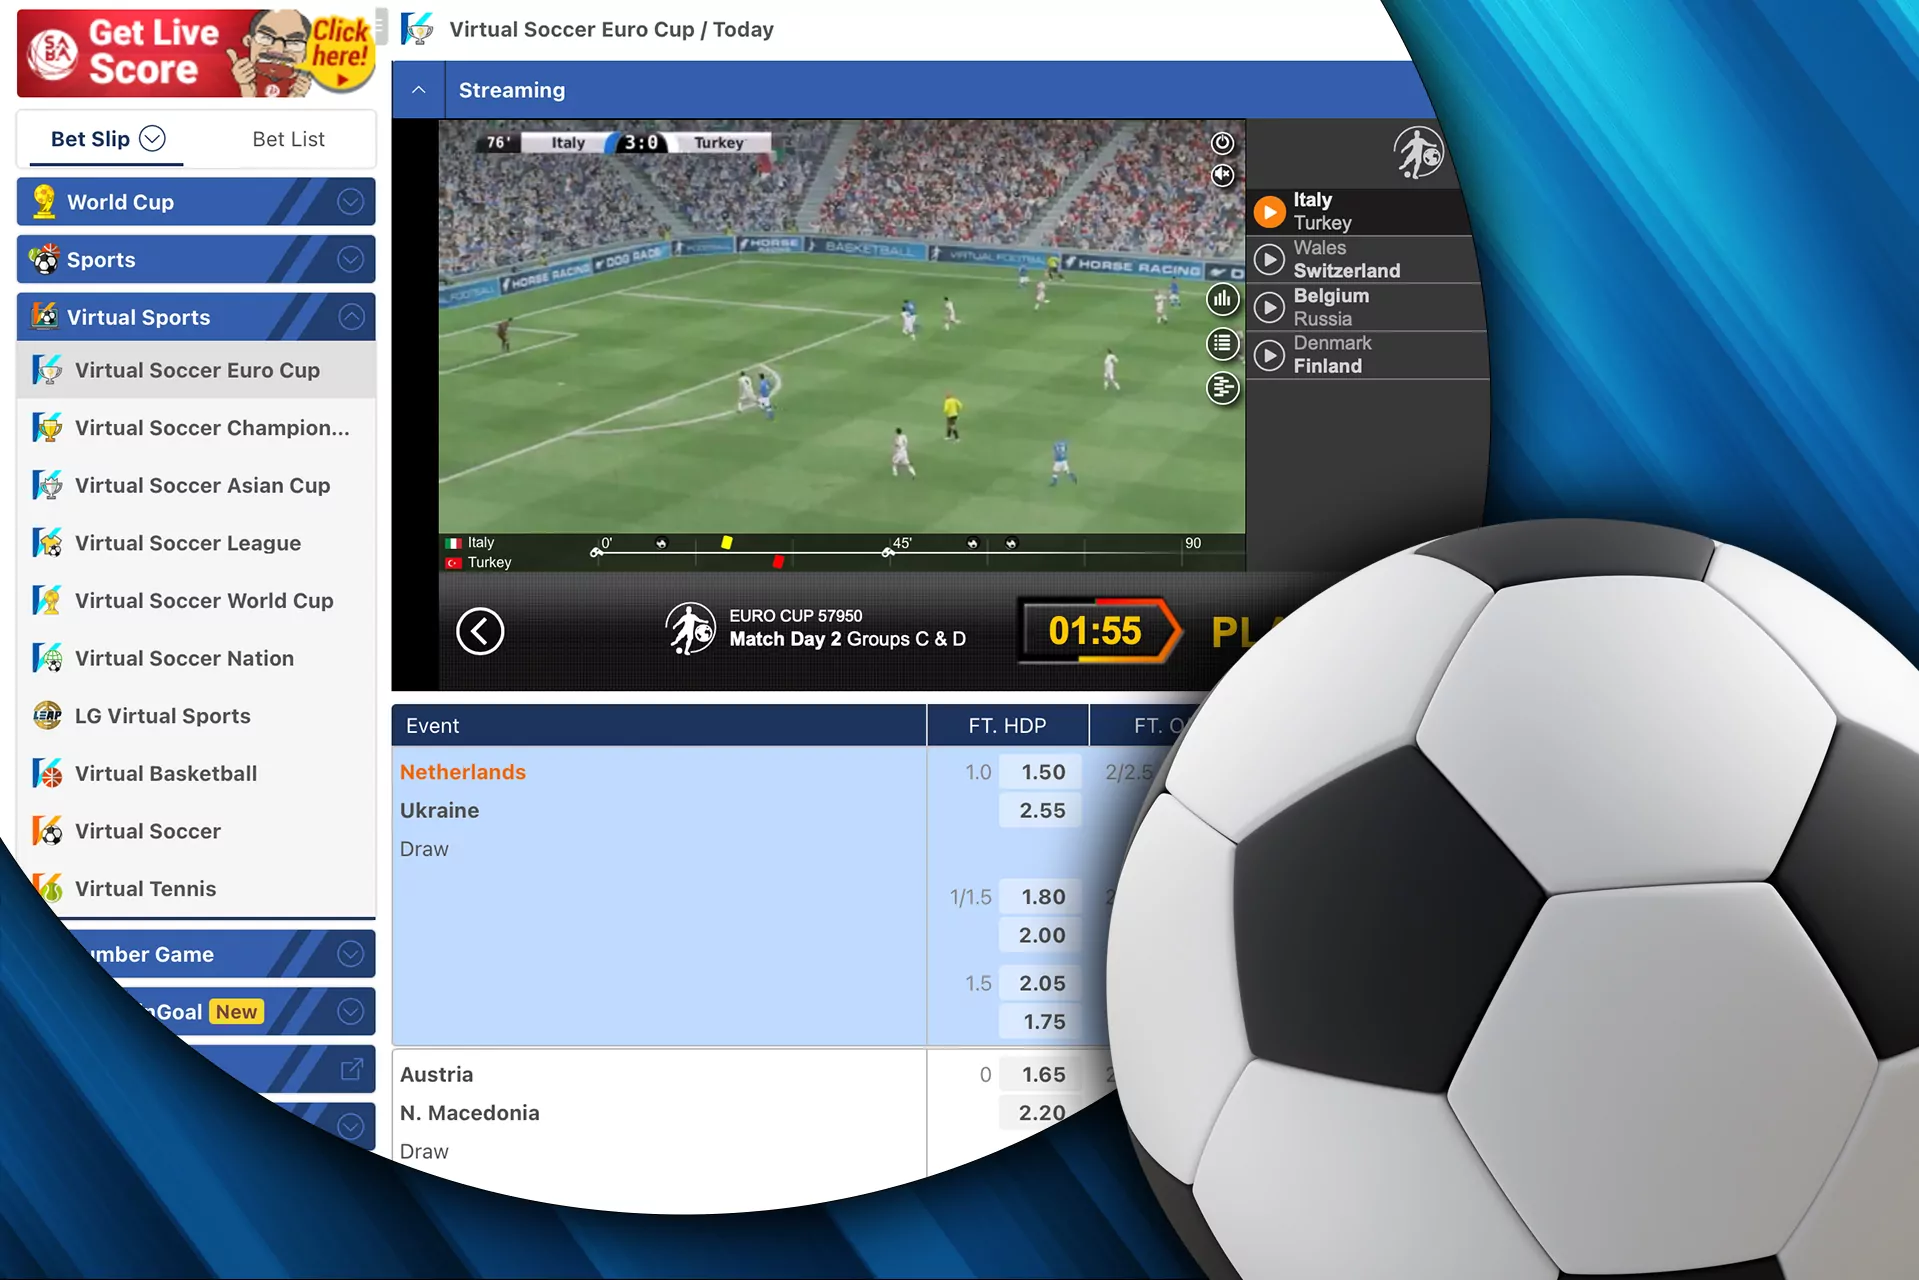 Virtual sports is also available for betting.